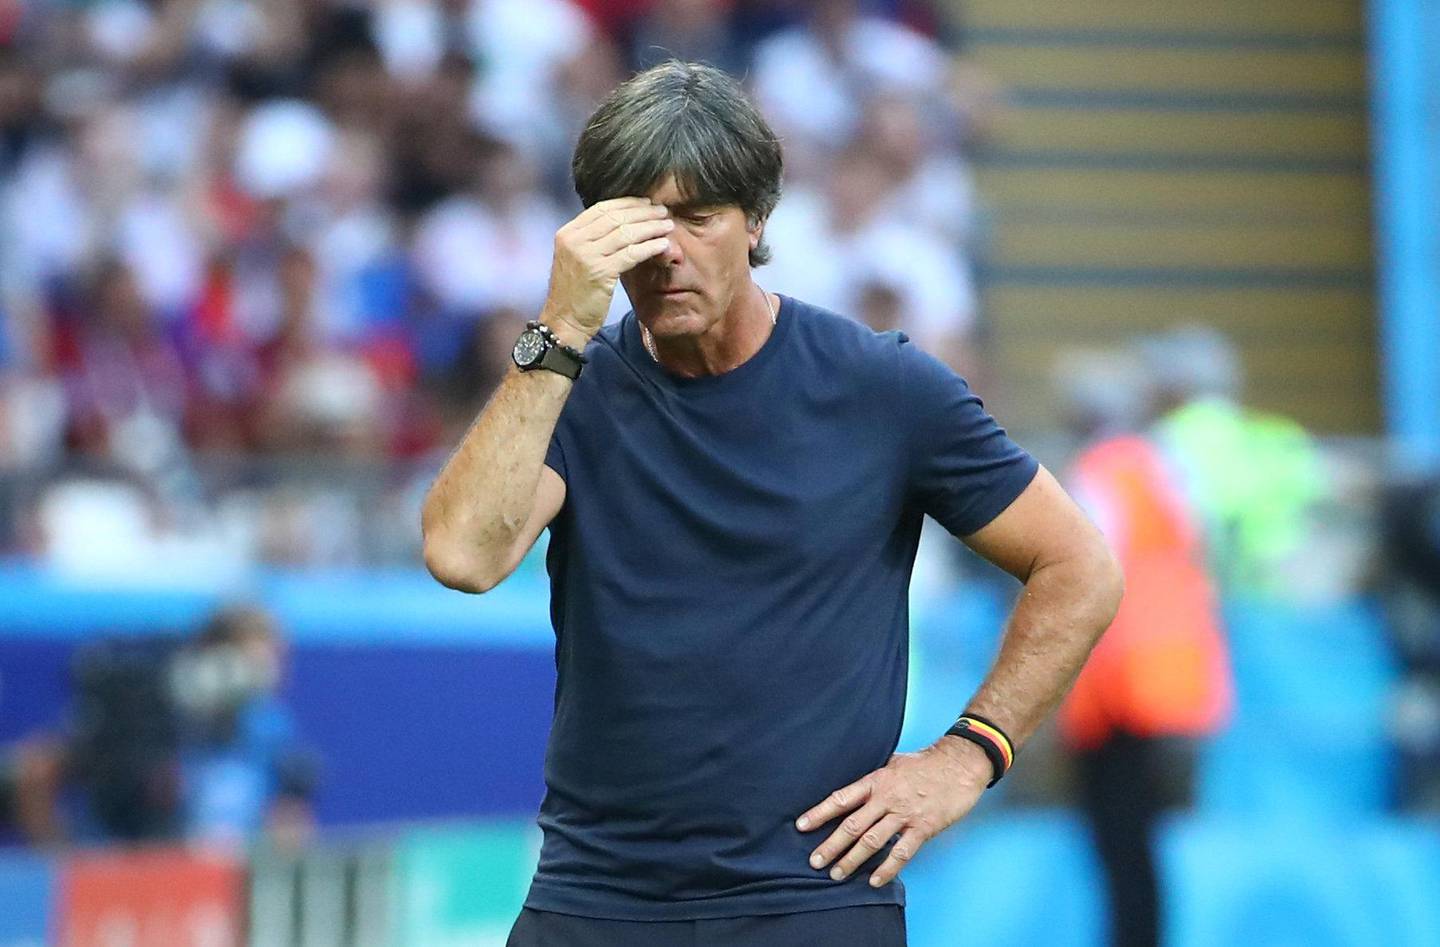 Soccer Football - World Cup - Group F - South Korea vs Germany - Kazan Arena, Kazan, Russia - June 27, 2018   Germany coach Joachim Low looks dejected during the match   REUTERS/Michael Dalder